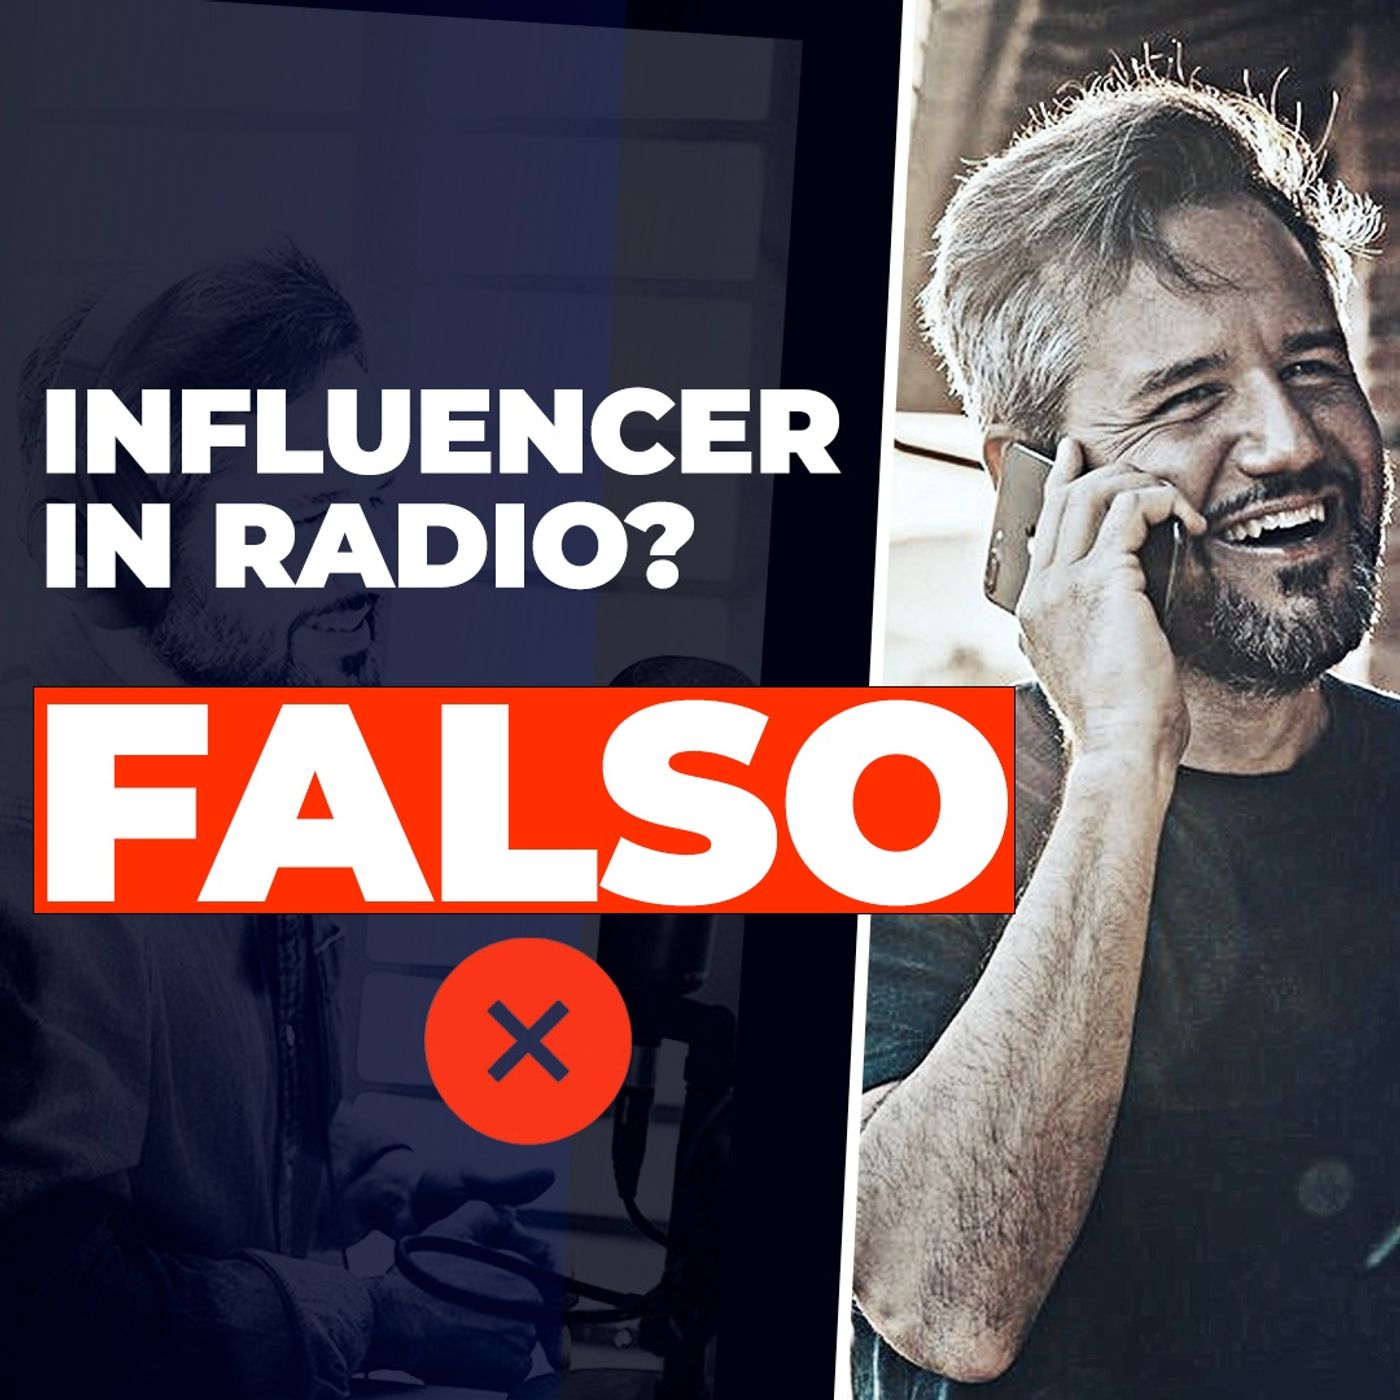 Influencer in Radio? Falso!